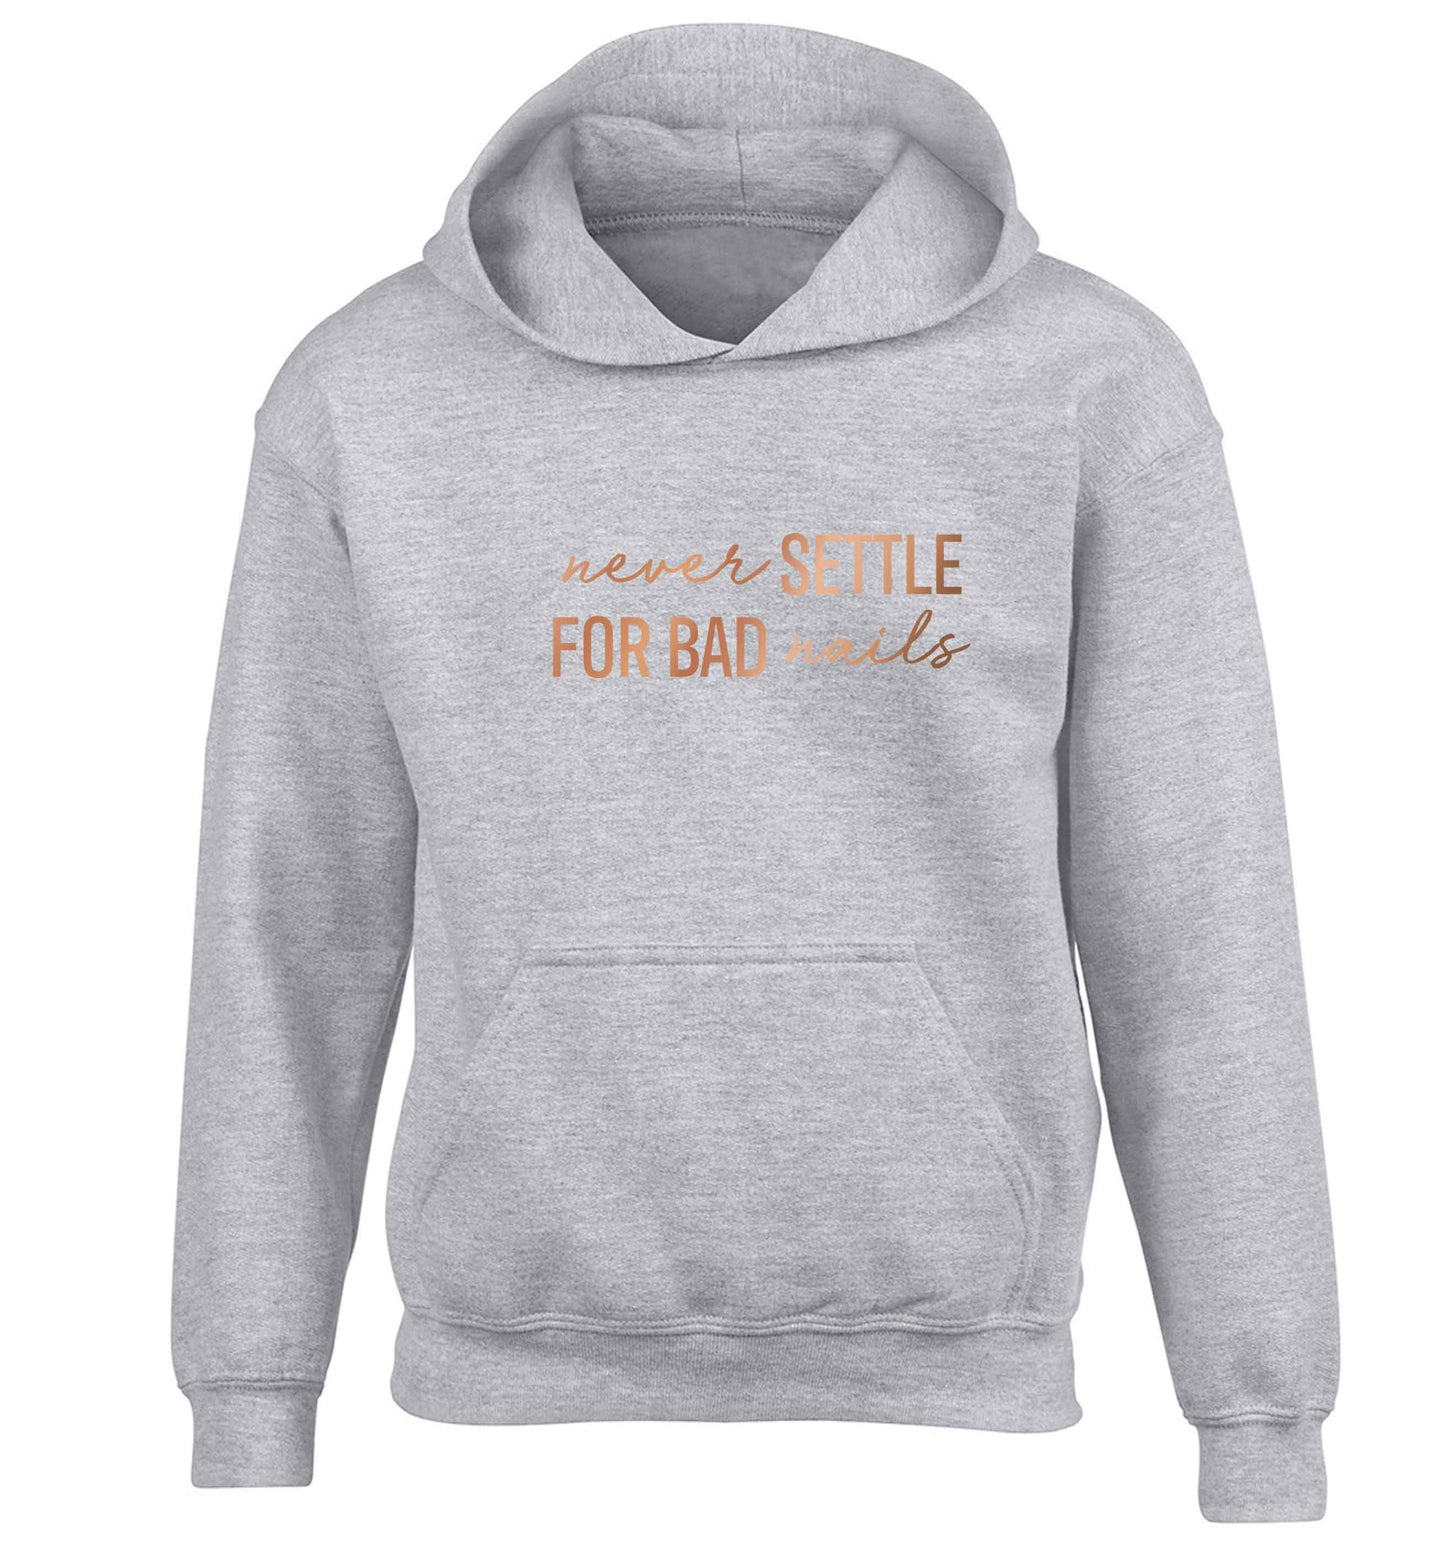 Never settle for bad nails - rose gold children's grey hoodie 12-13 Years